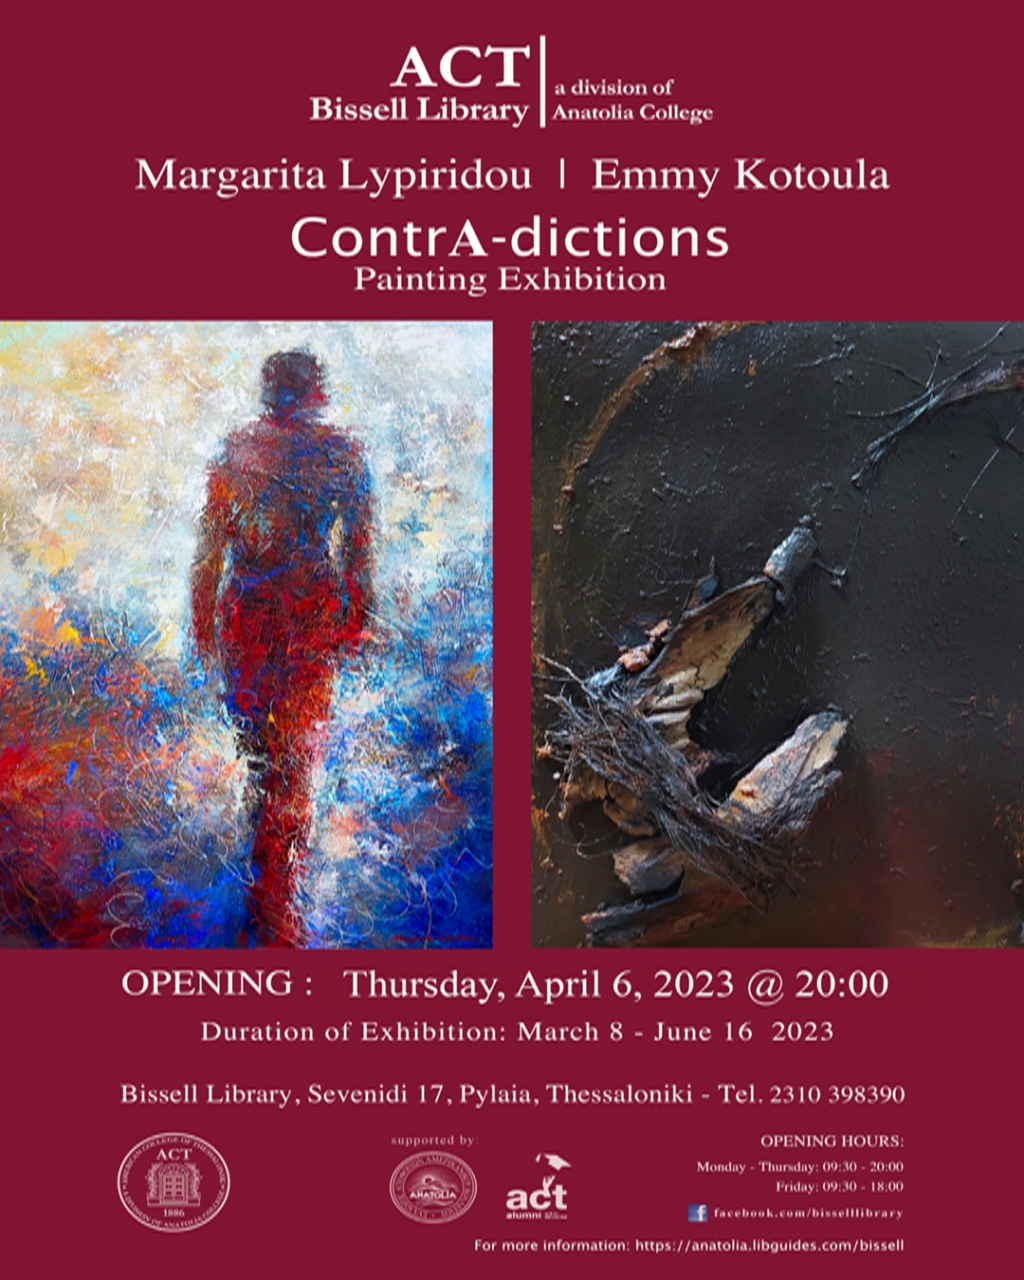 &quot;ContrA-dictions&quot;. Painting exhibition at the Bissell Library by Margarita Lypiridou and Emmy Kotoula